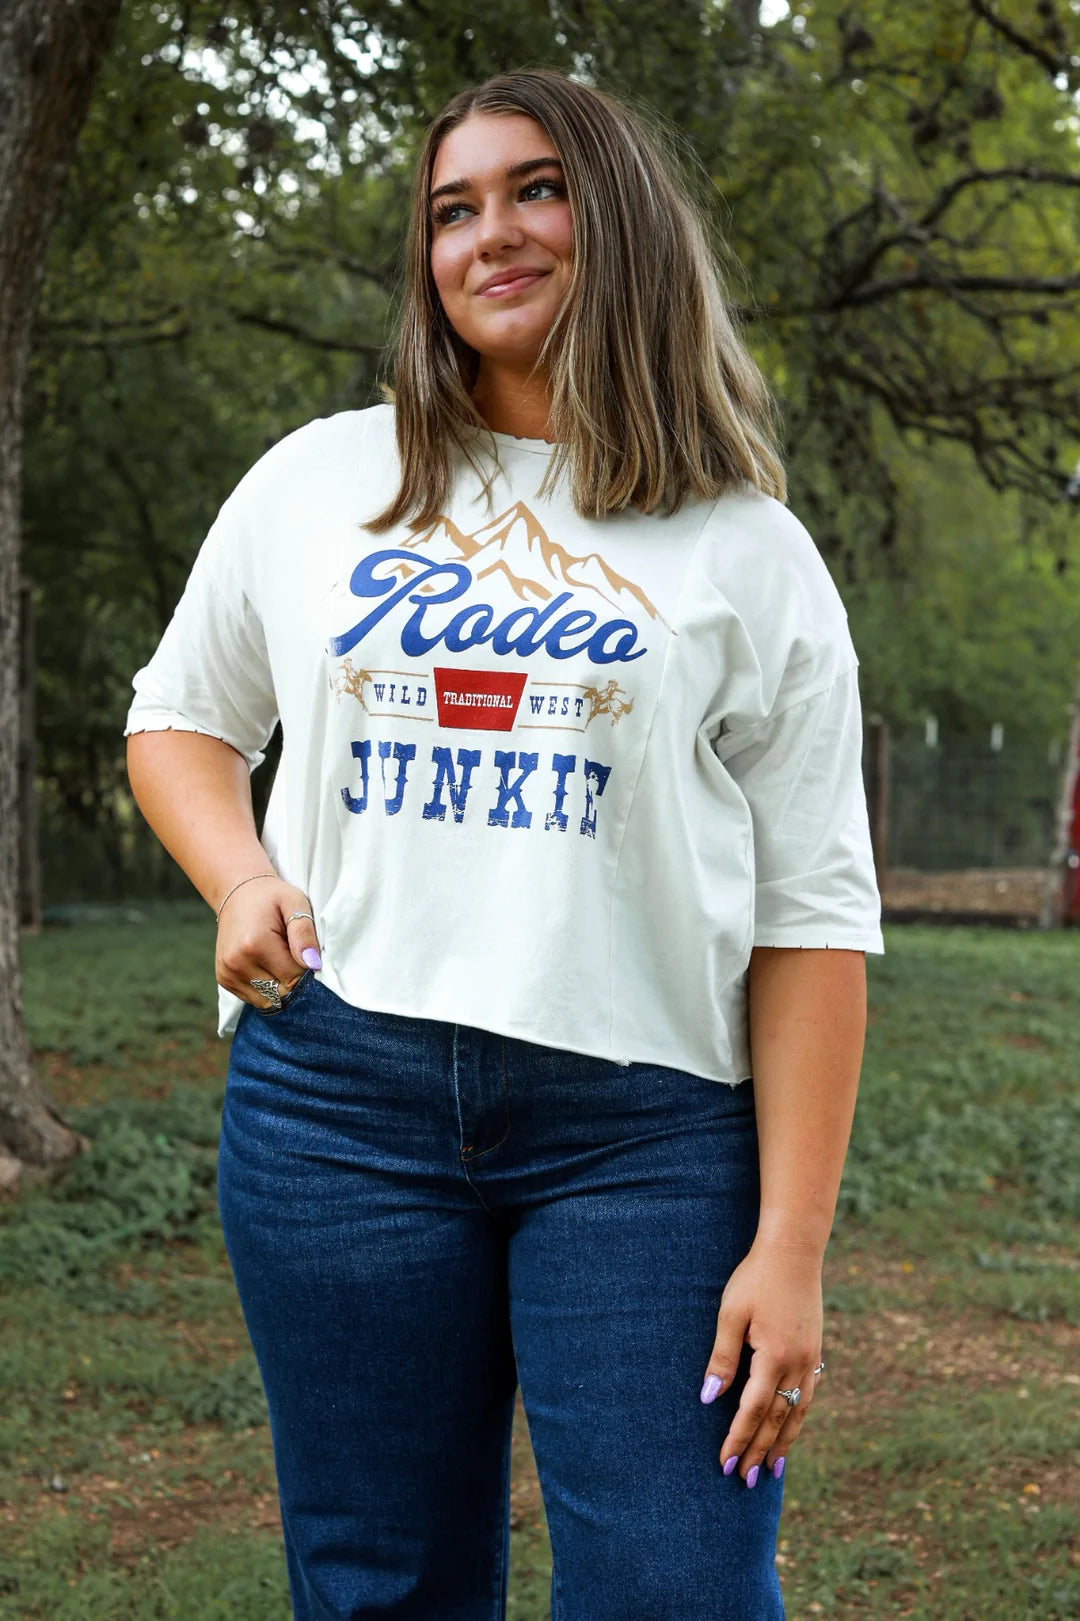 Rodeo Wild Traditional West Junkie Cropped Tee